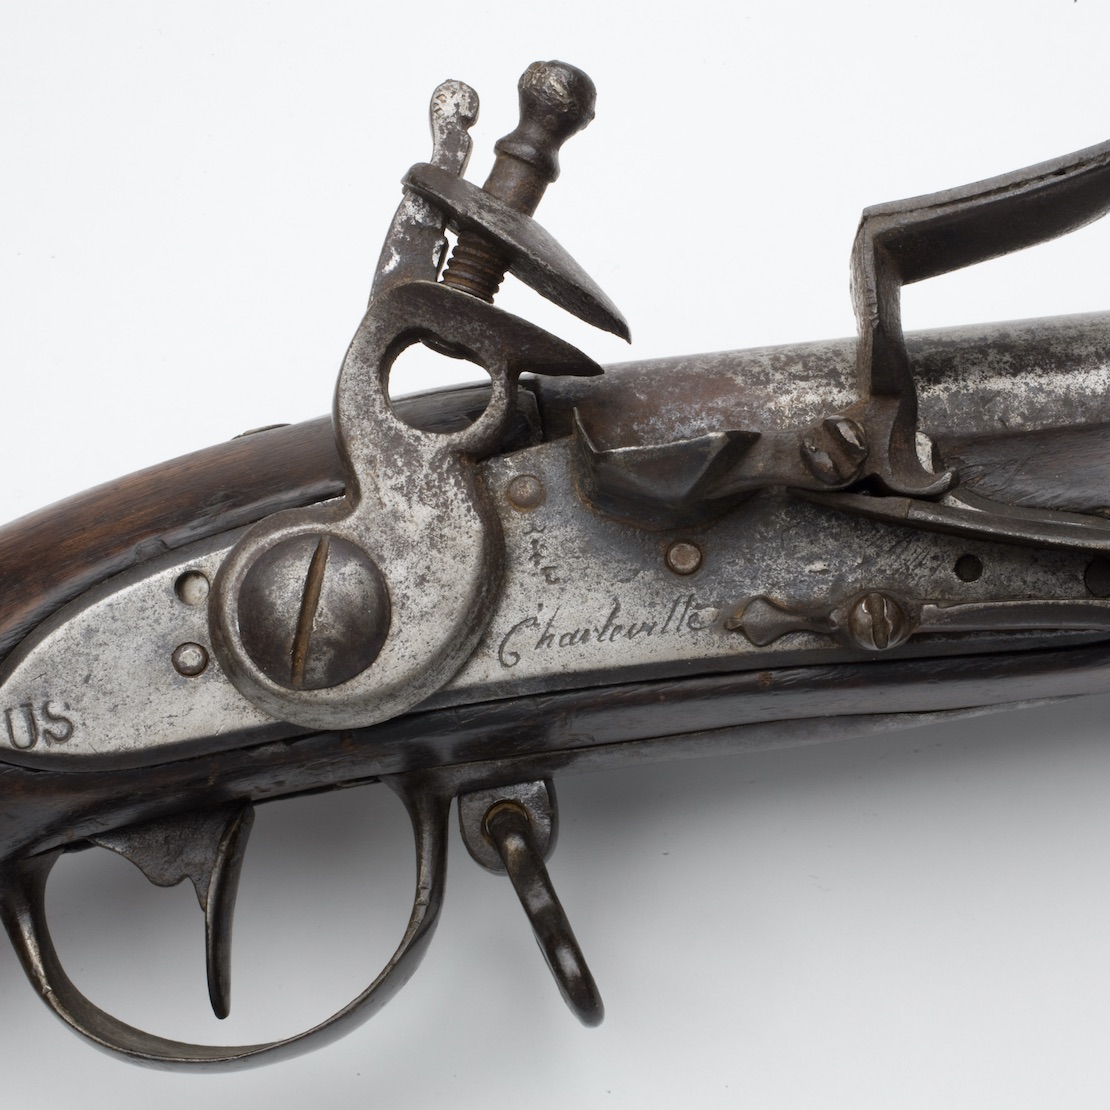 The lock of a Charleville musket, showing French and American marks, illustrates details used to interpret artifacts of the Revolutionary War.